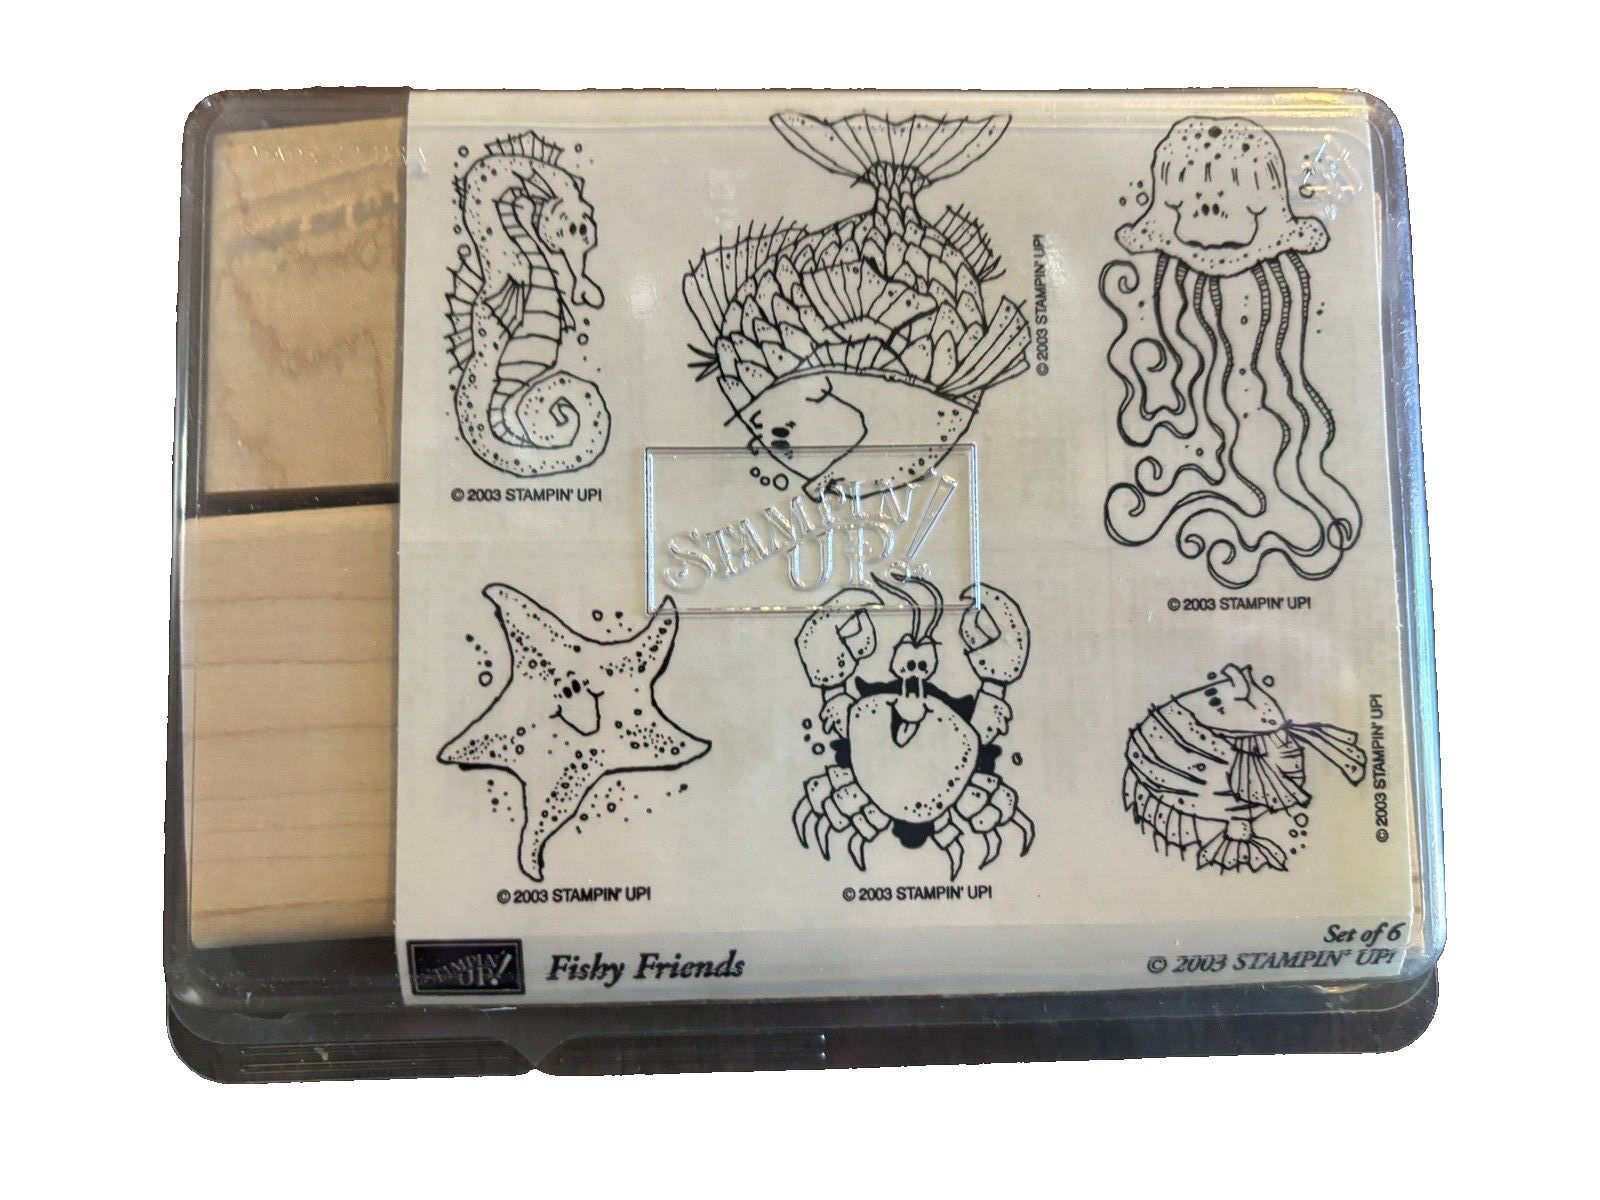 2003 Stampin Up Set Of 6 Fishy Friends Unmounted Rubber Stamps Crafts Scrapbook - $17.63